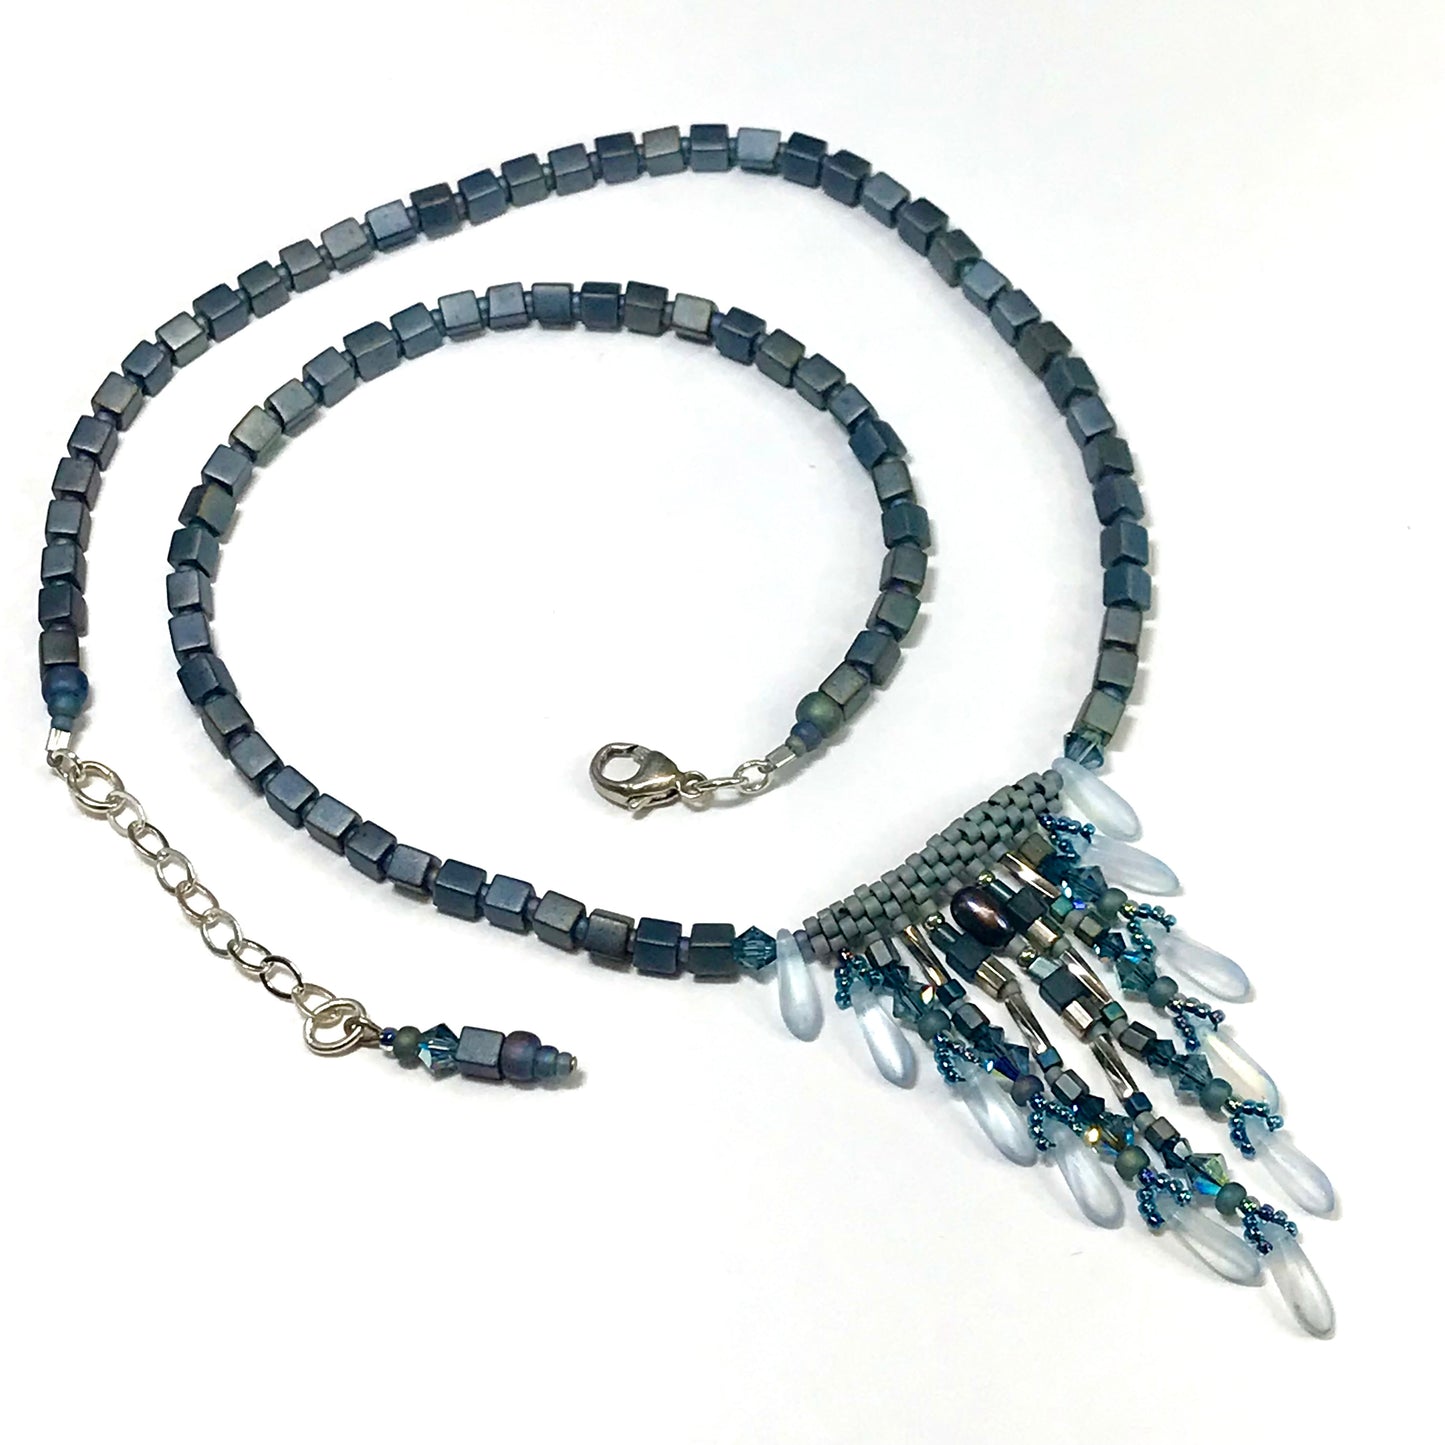 Blue Gray Silver Fringy Necklace - 9 strands